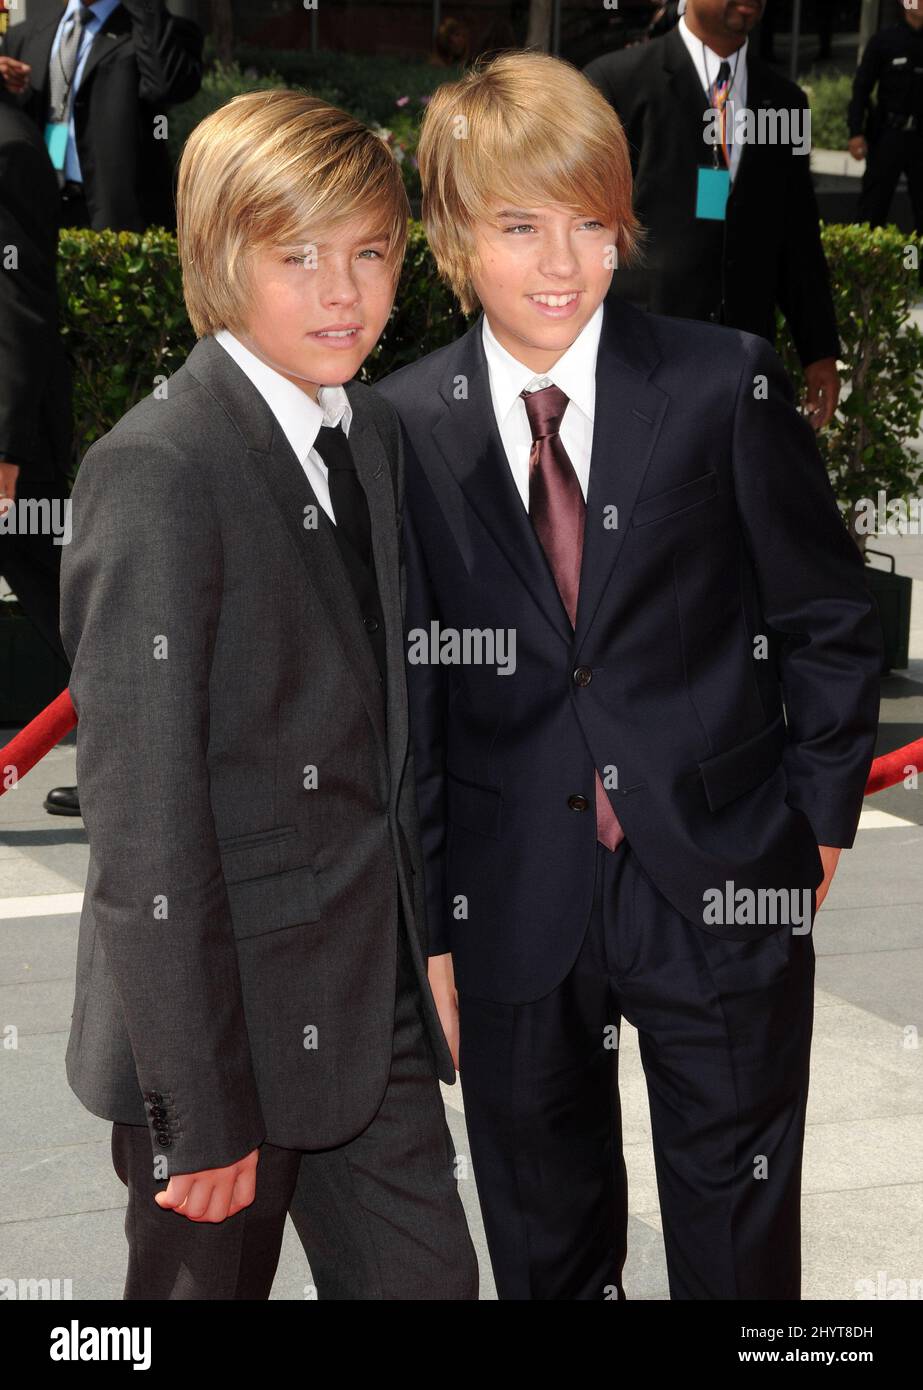 Dylan Sprouse and Cole Sprouse arriving at the 60th Primetime Creative Arts Emmy Awards held at the Nokia Theatre, Los Angeles. Stock Photo